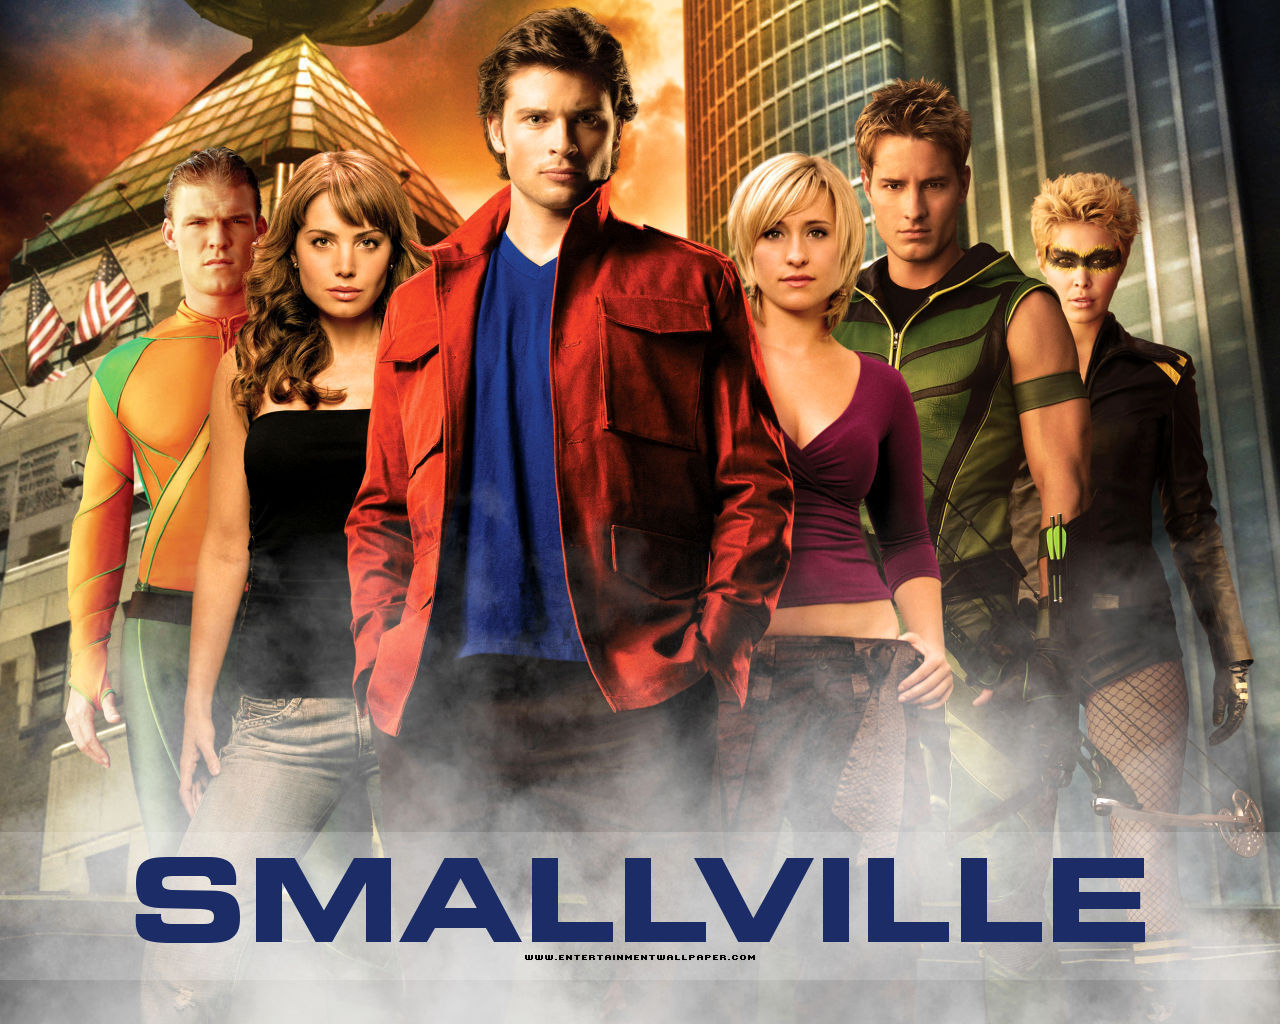 smallville wallpaper,movie,poster,musical,television program,fictional character